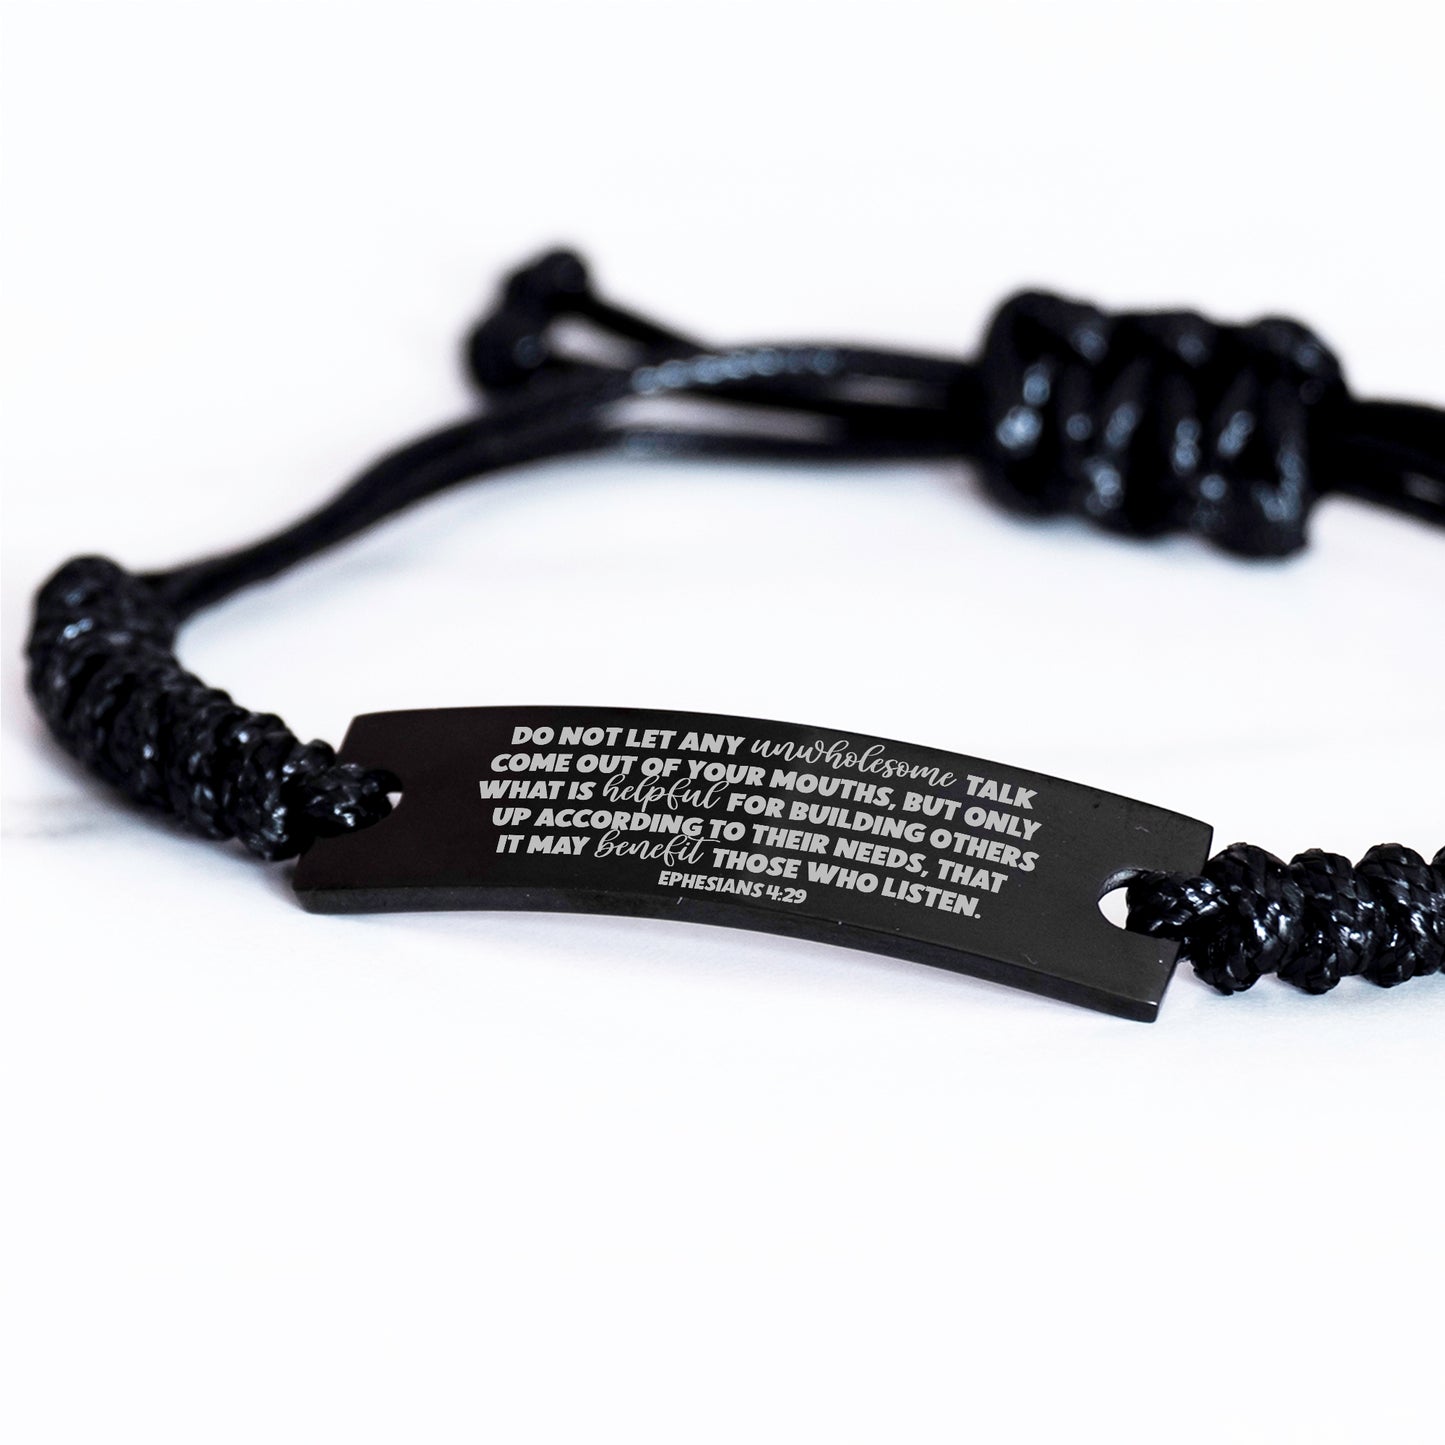 Ephesians 4:29, Do Not Let Any Unwholesome Talk, Engraved Bible Verse Bracelet, Family Scripture Christian Gift, Rope Bracelet